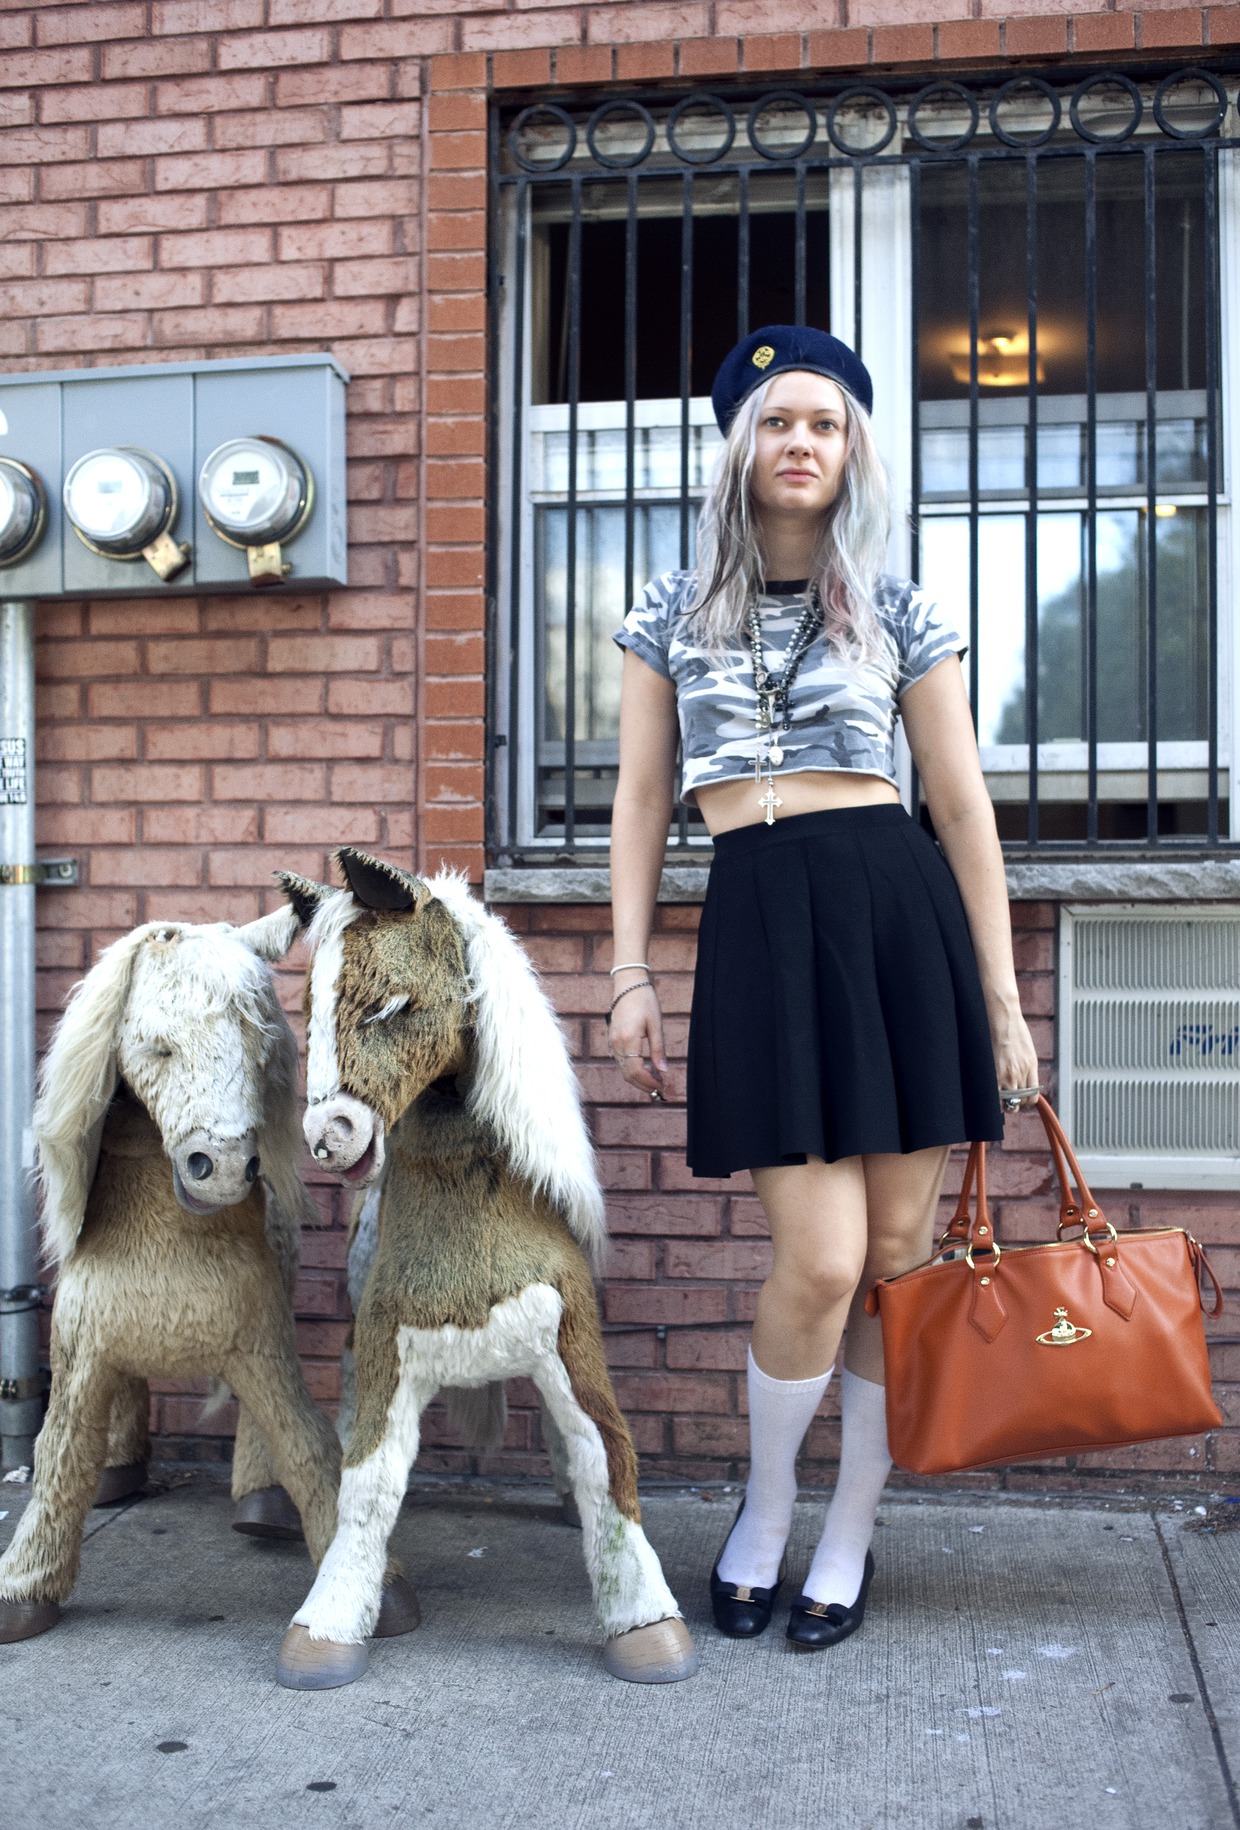 Where Are They Going: Bushwick Street Style